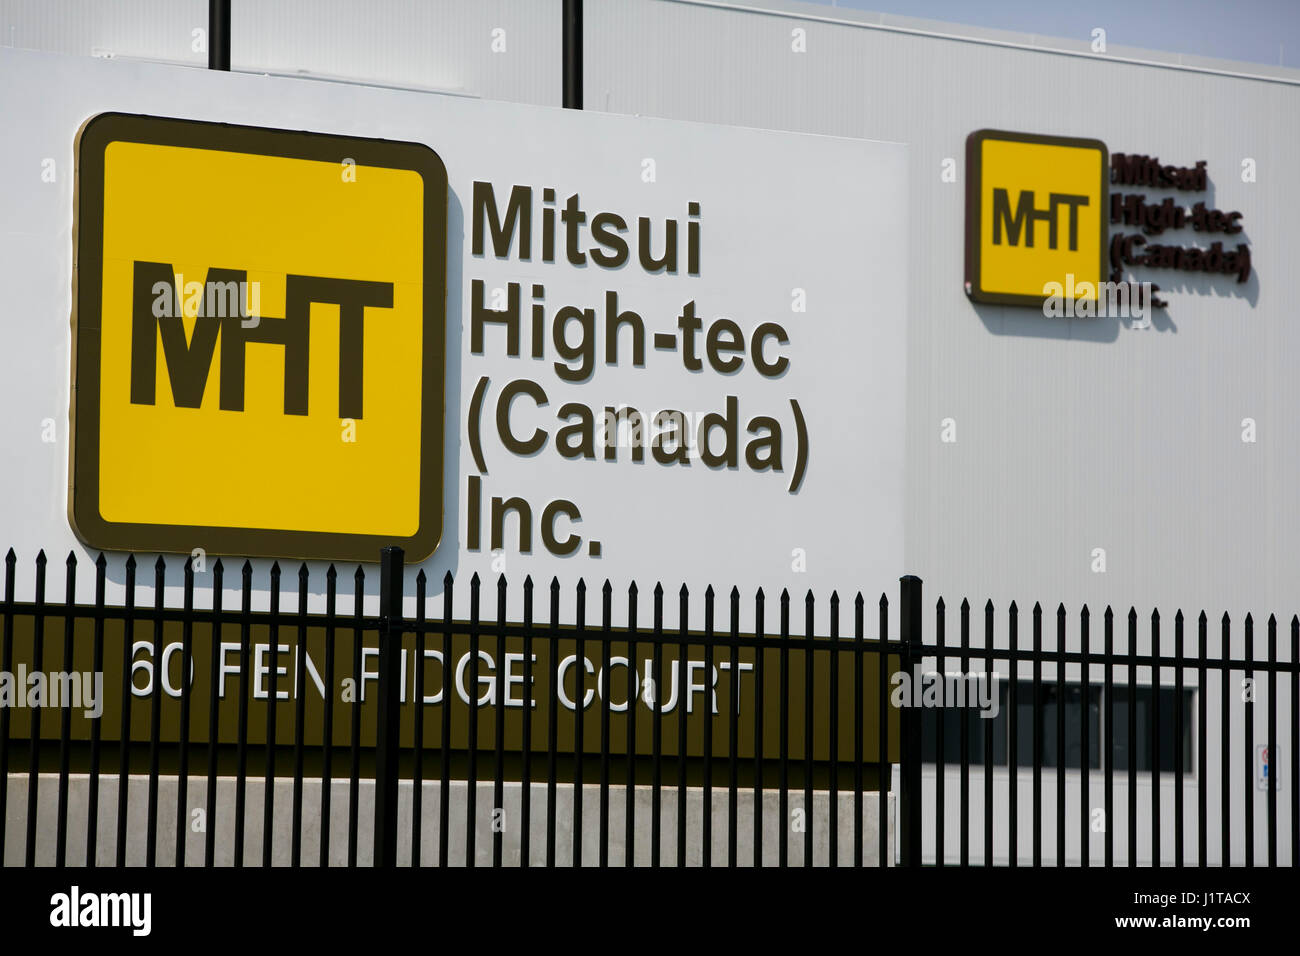 A logo sign outside of a facility occupied by Mitsui High-tec, Inc., in Brantford, Ontario, Canada, on April 15, 2017. Stock Photo